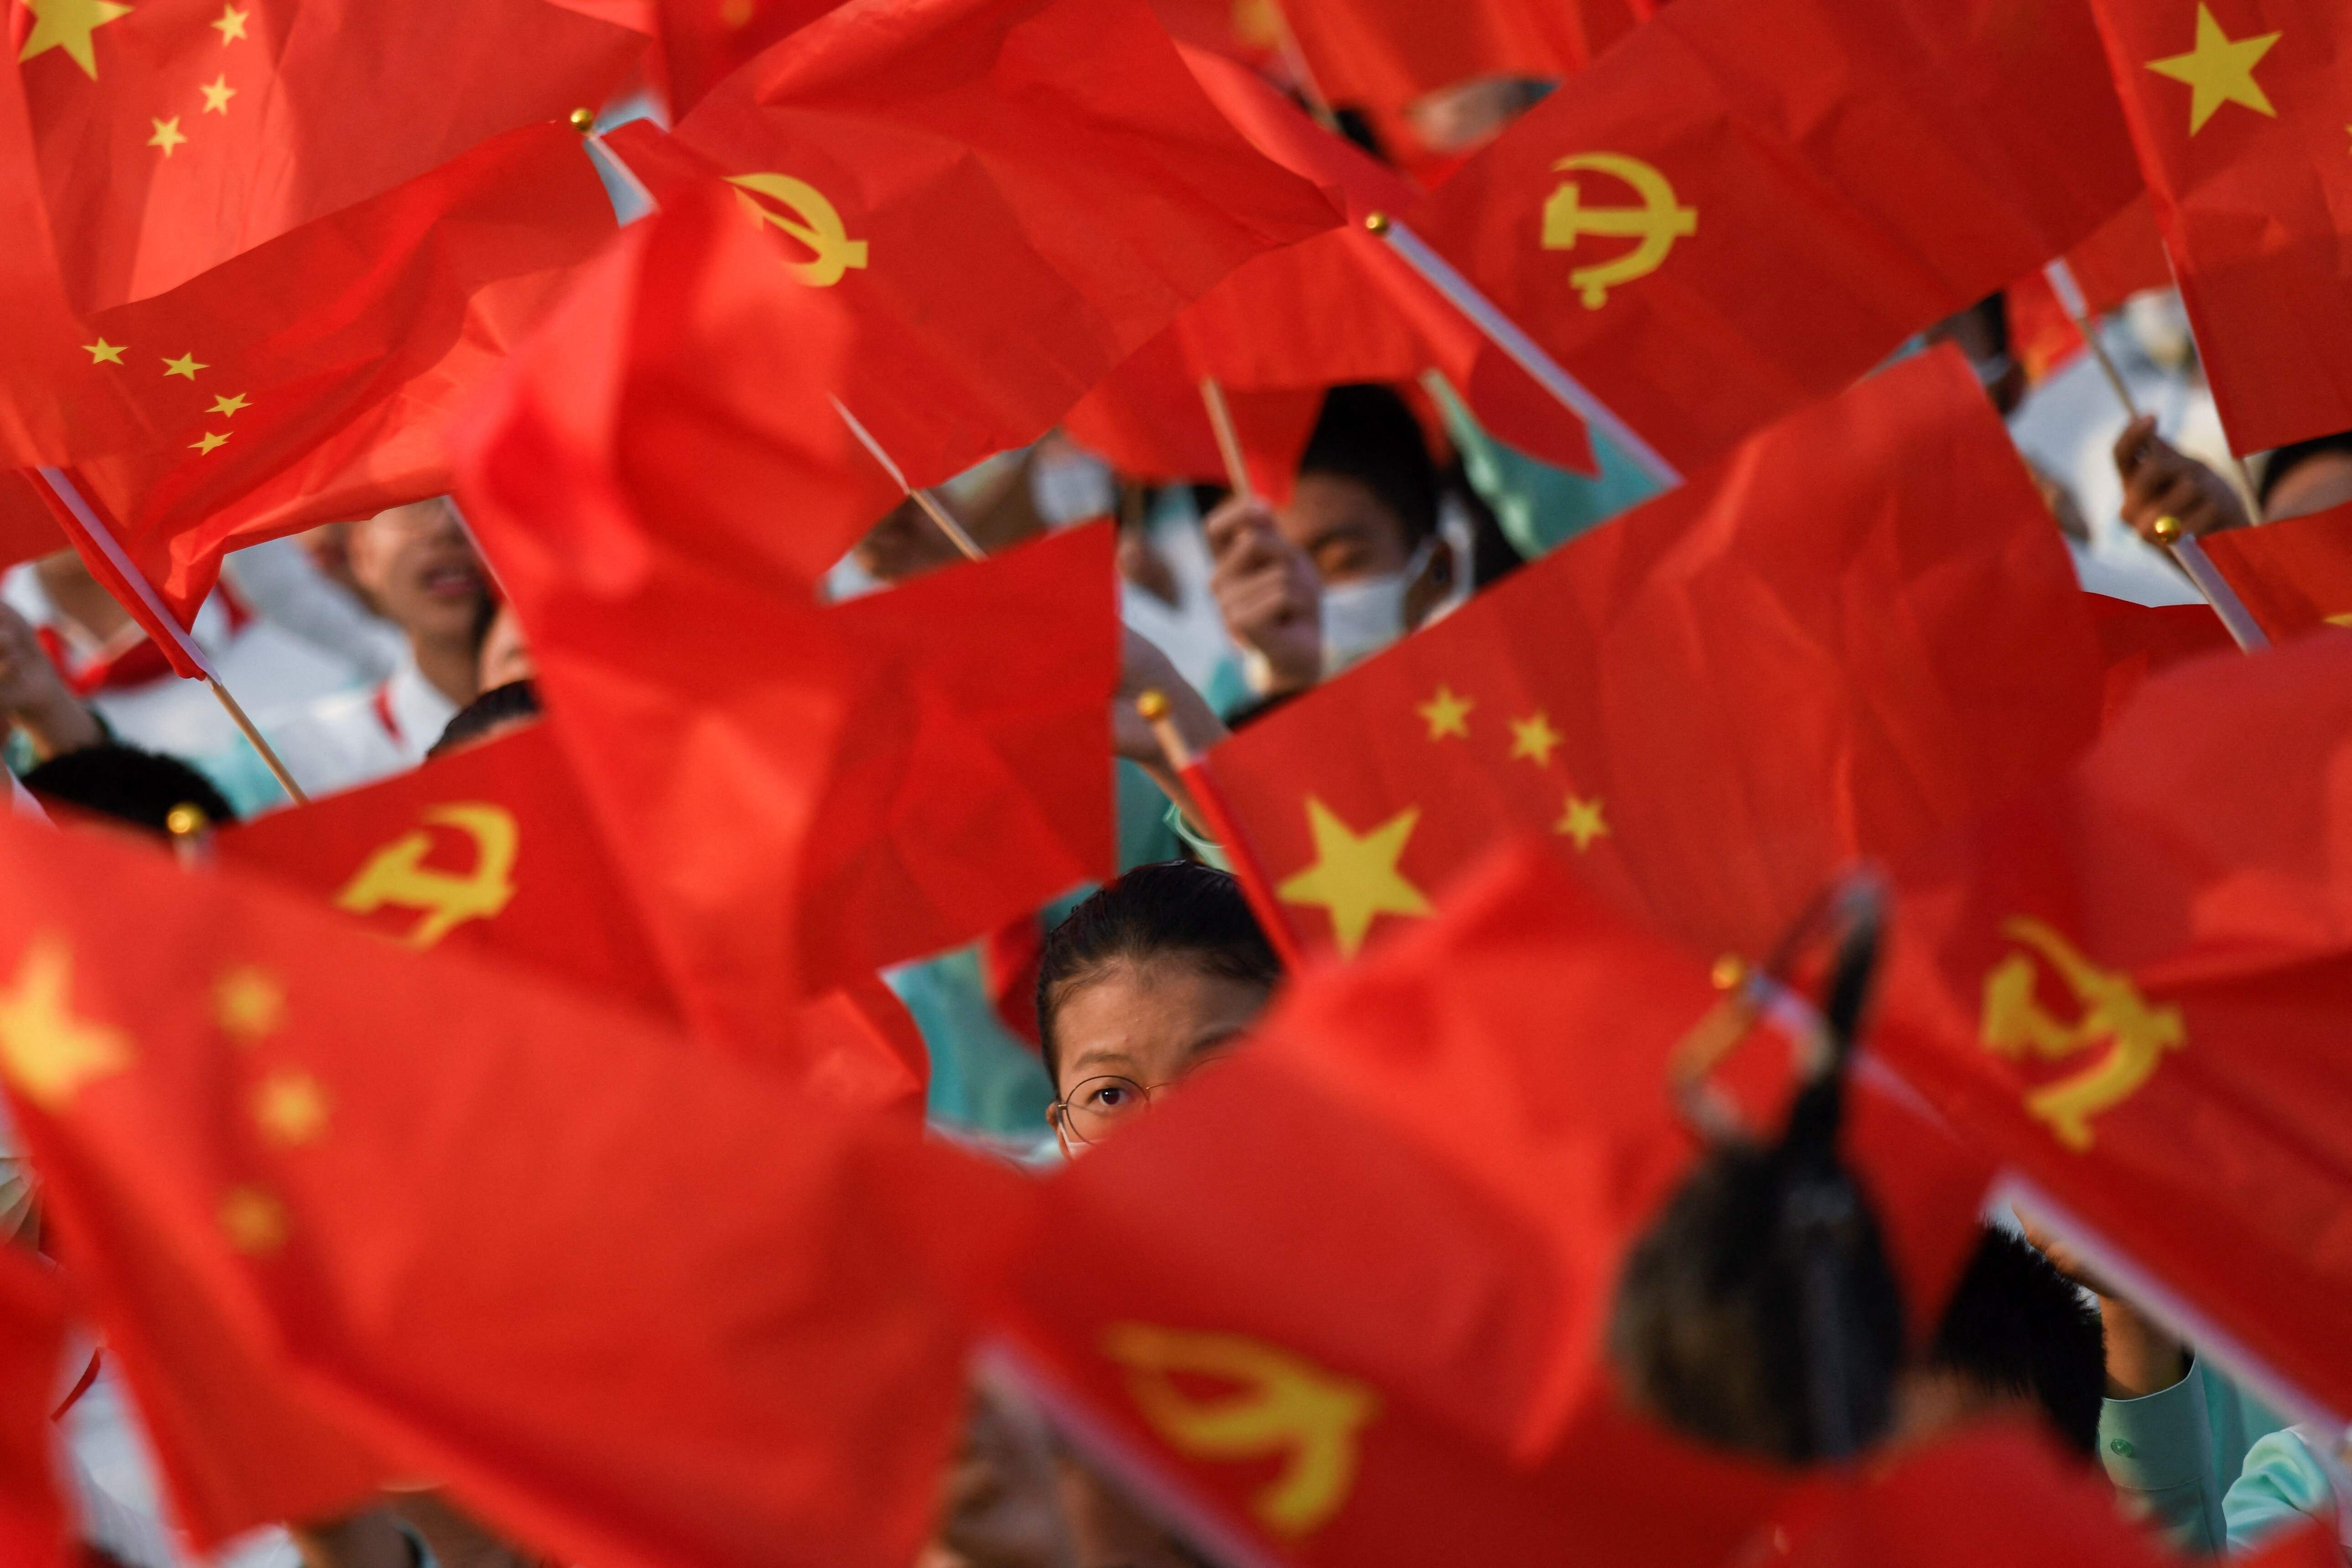 A People’s Daily commentary claims the world “has begun to look at China differently”. Photo: AFP